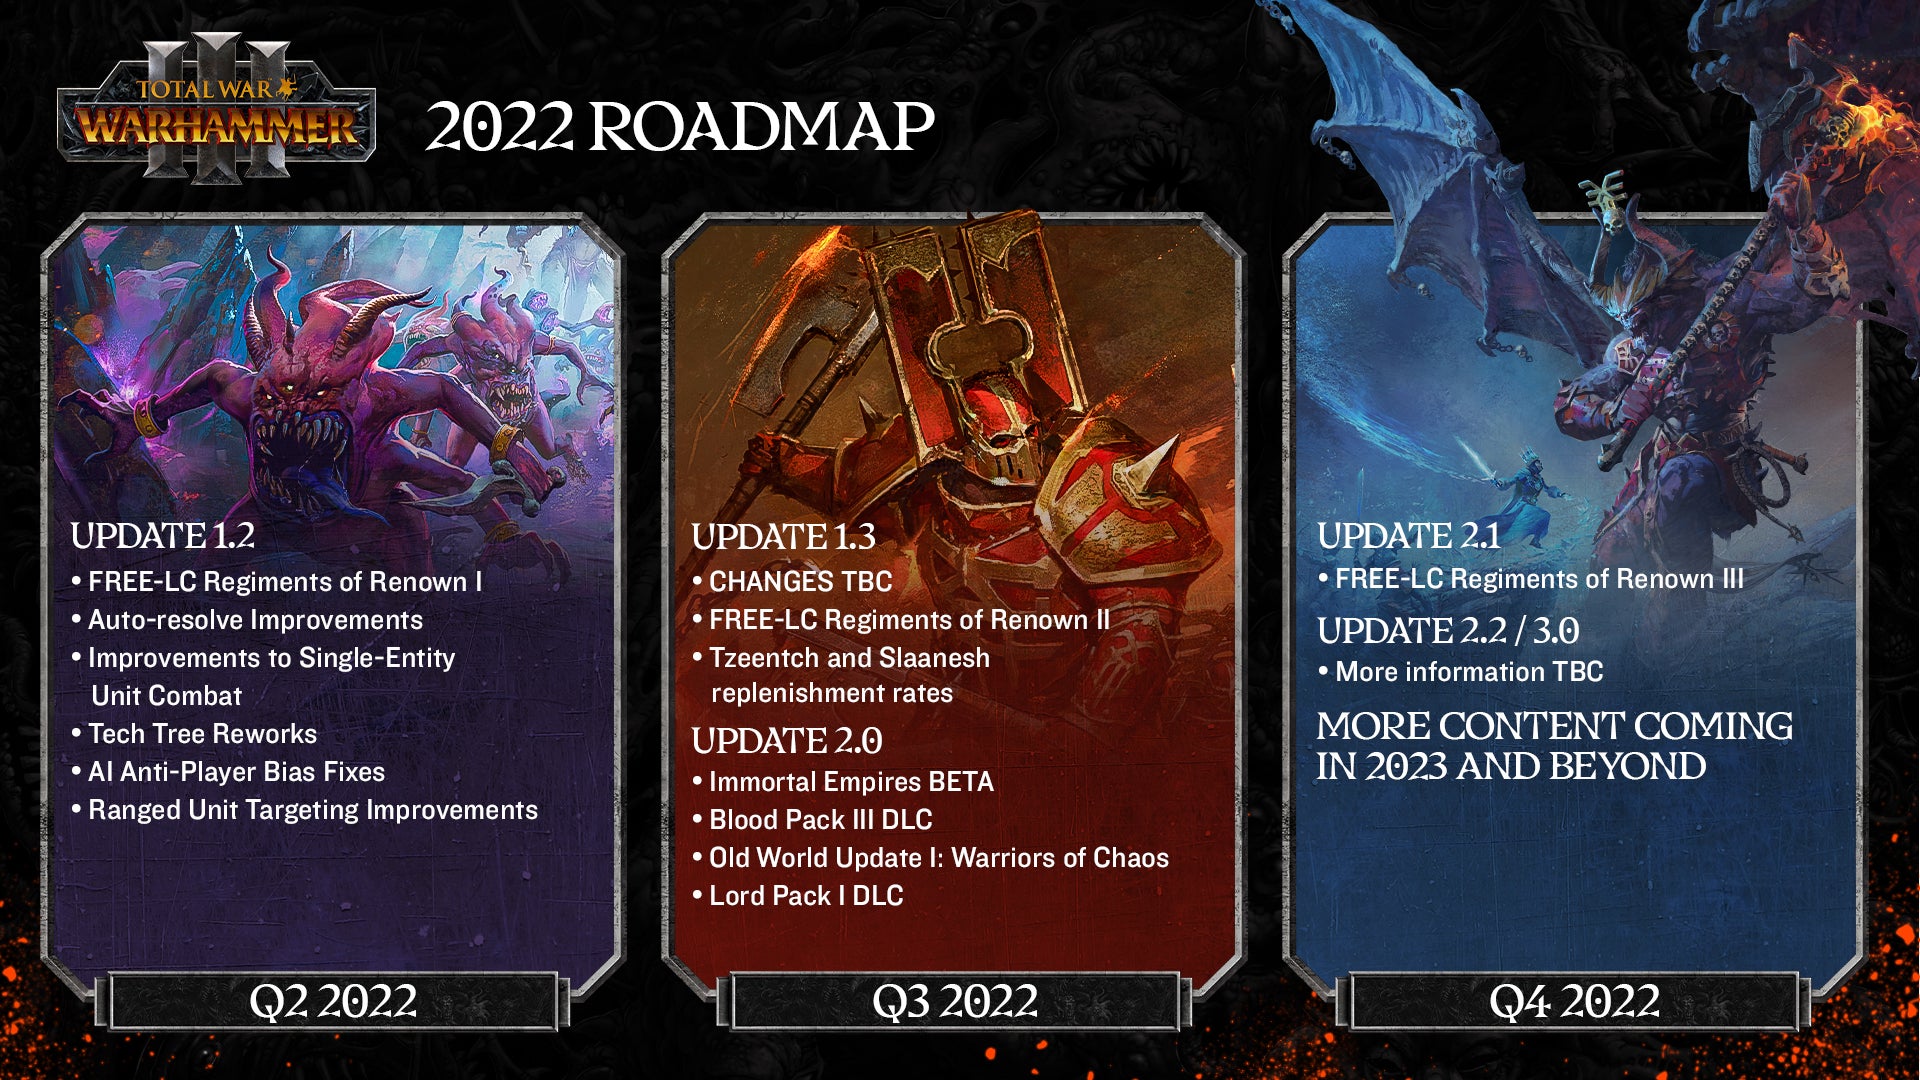 An image showing the 2022 update roadmap for Total War: Warhammer 3.